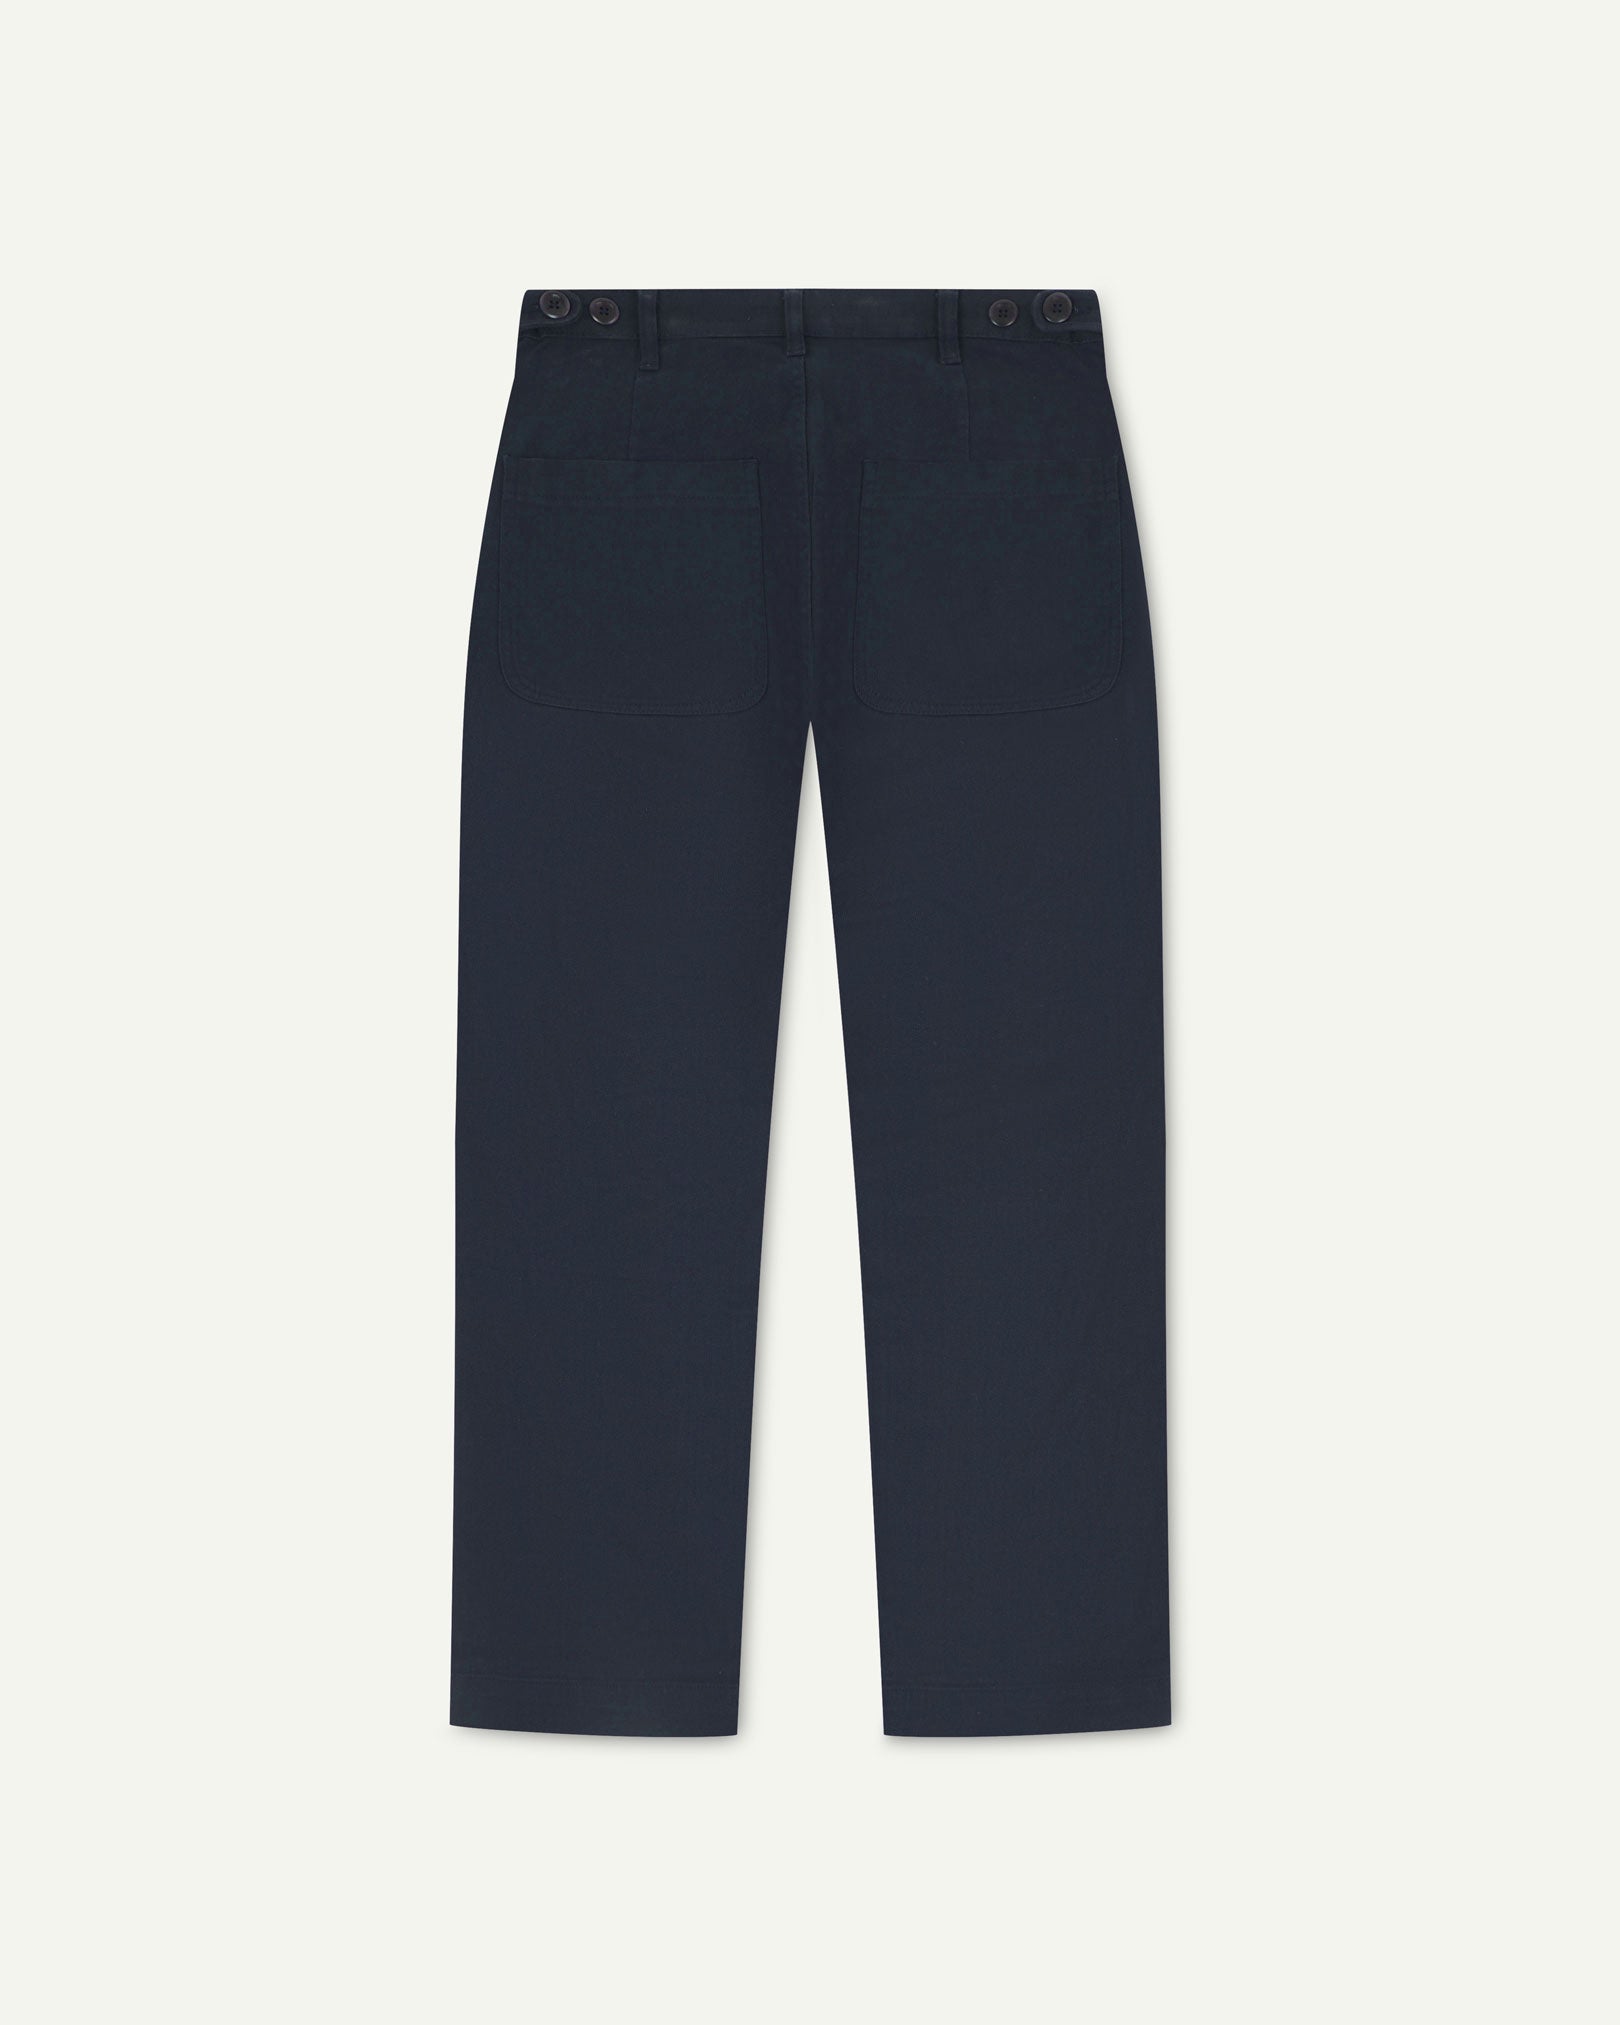 Back flat view of 5013 Uskees drill straight leg pants in dark blue, with focus on on rear pockets and adjustable waistband with corozo buttons.